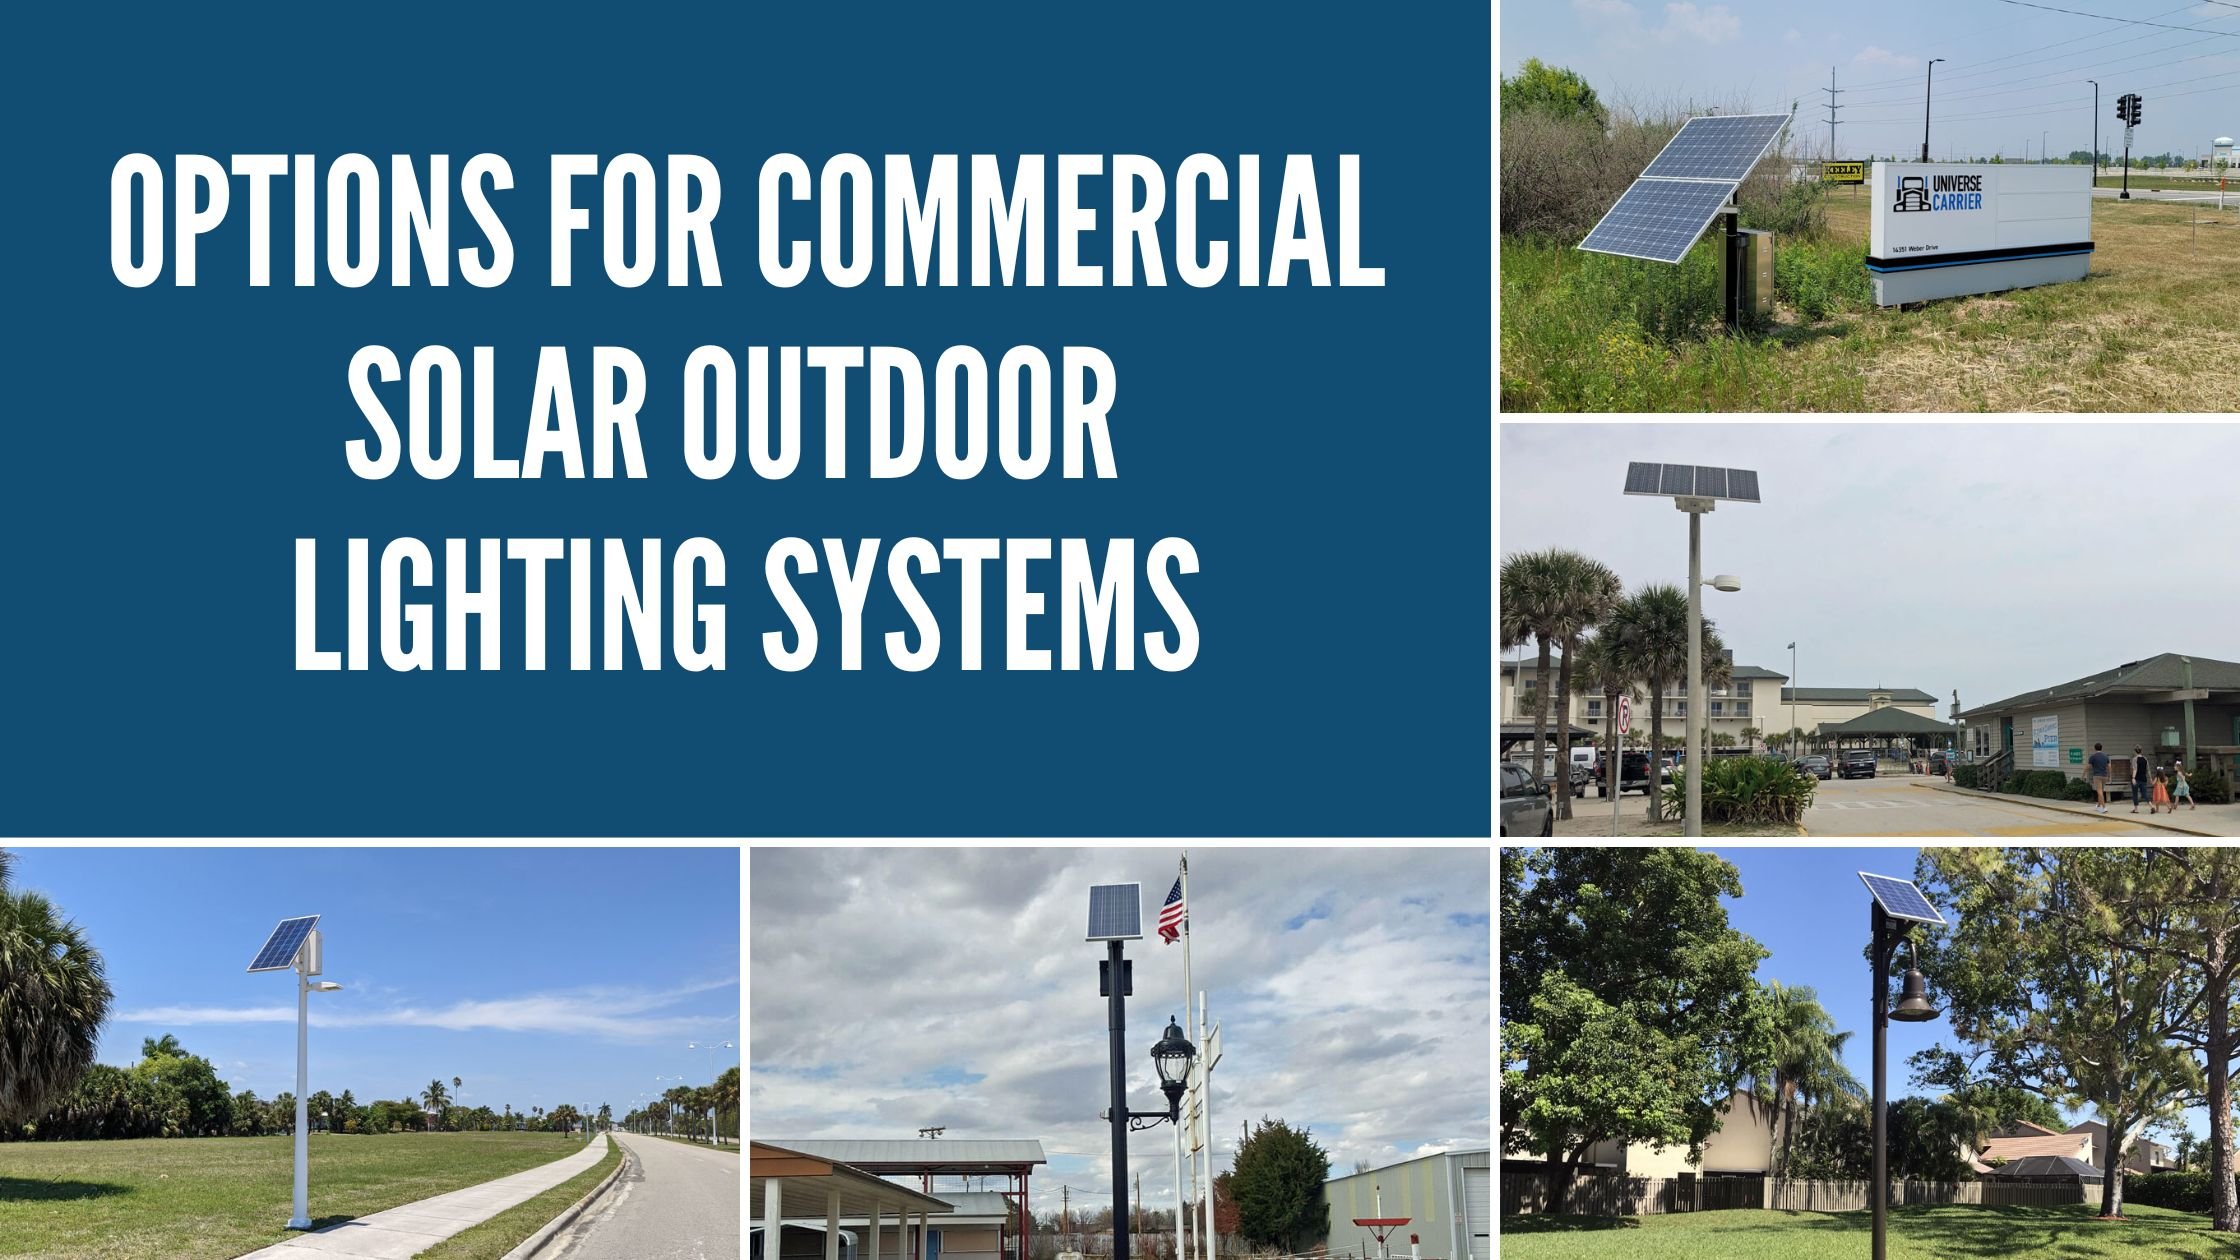 Options for Commercial Solar Outdoor Lighting Systems